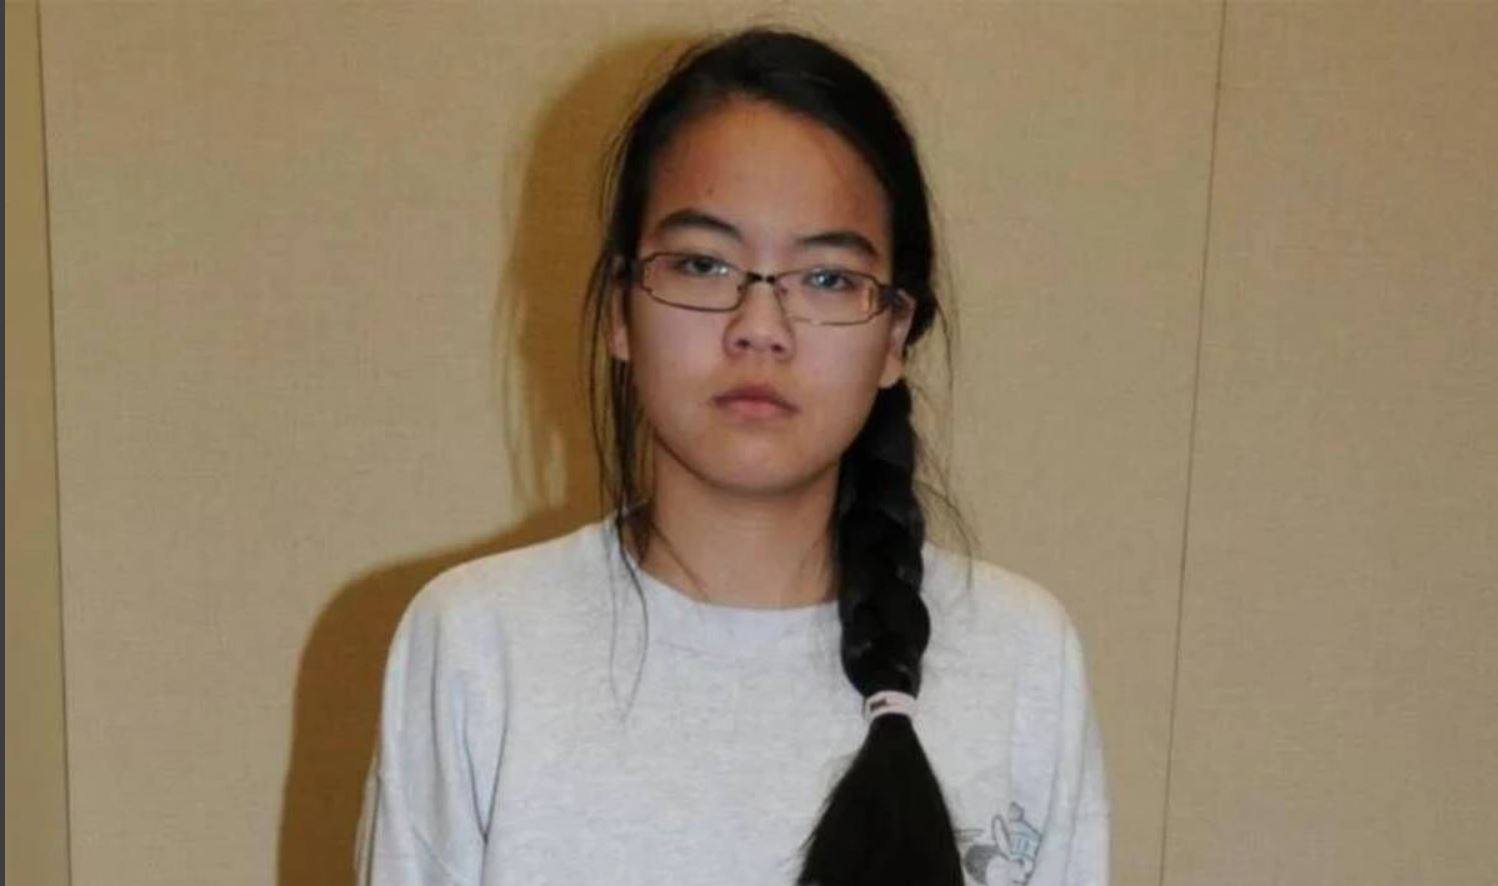 Jennifer Pan, who was convicted of hiring hitmen to shoot her parents in 2010, is the subject of a new Netflix documentary. Photo: Court exhibit